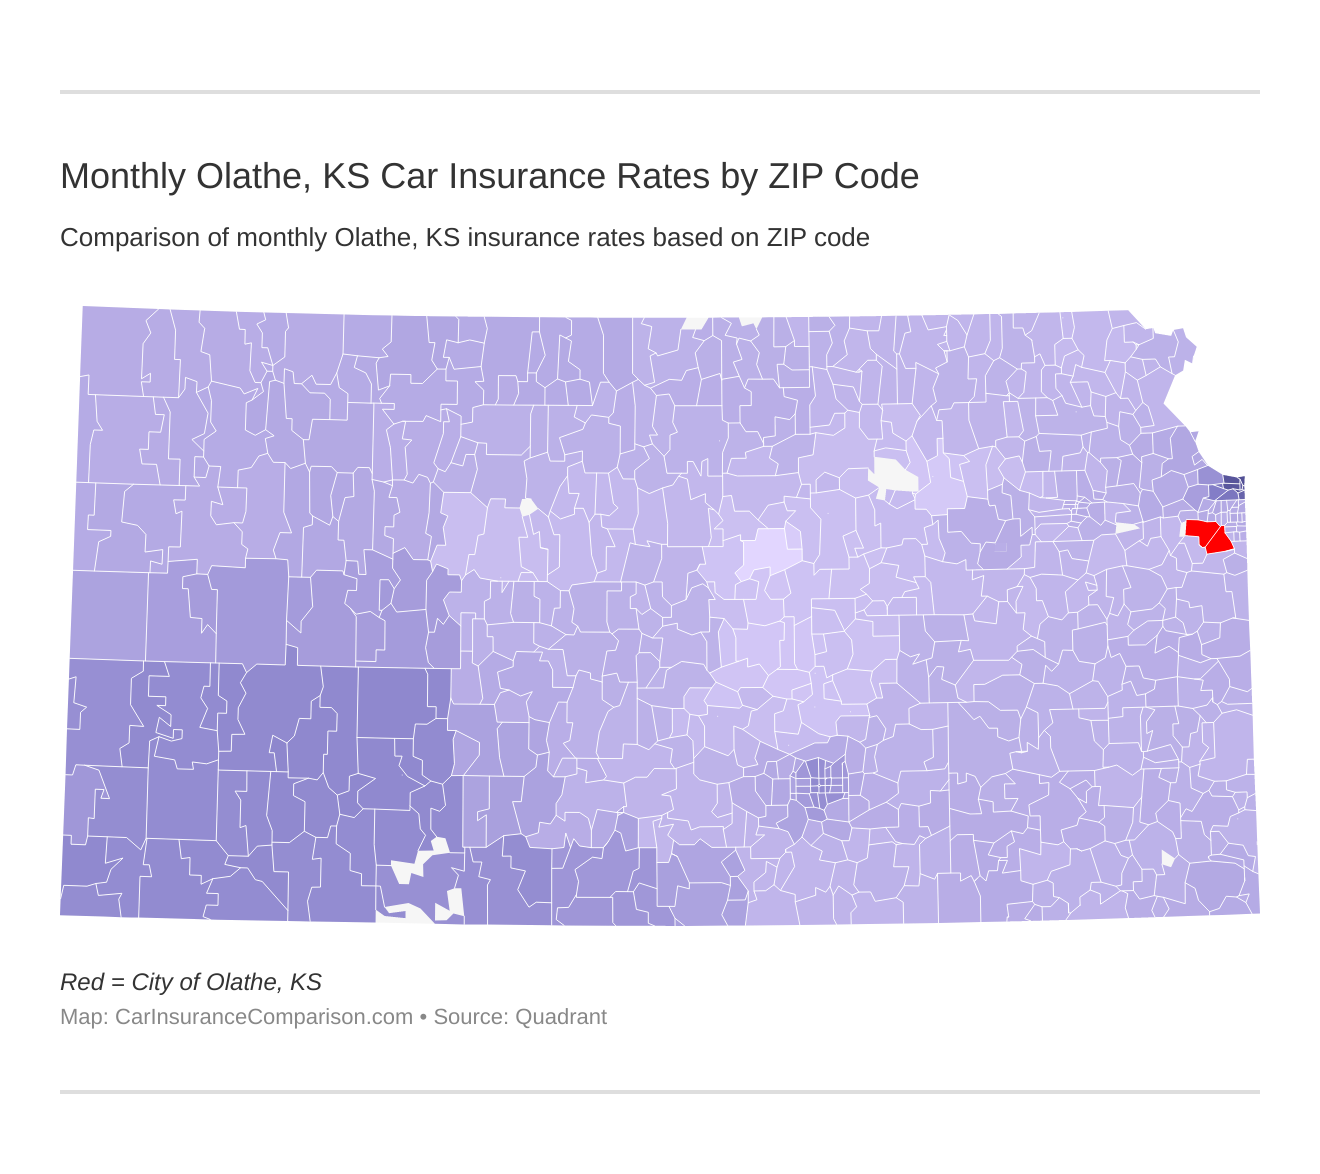 Monthly Olathe, KS Car Insurance Rates by ZIP Code